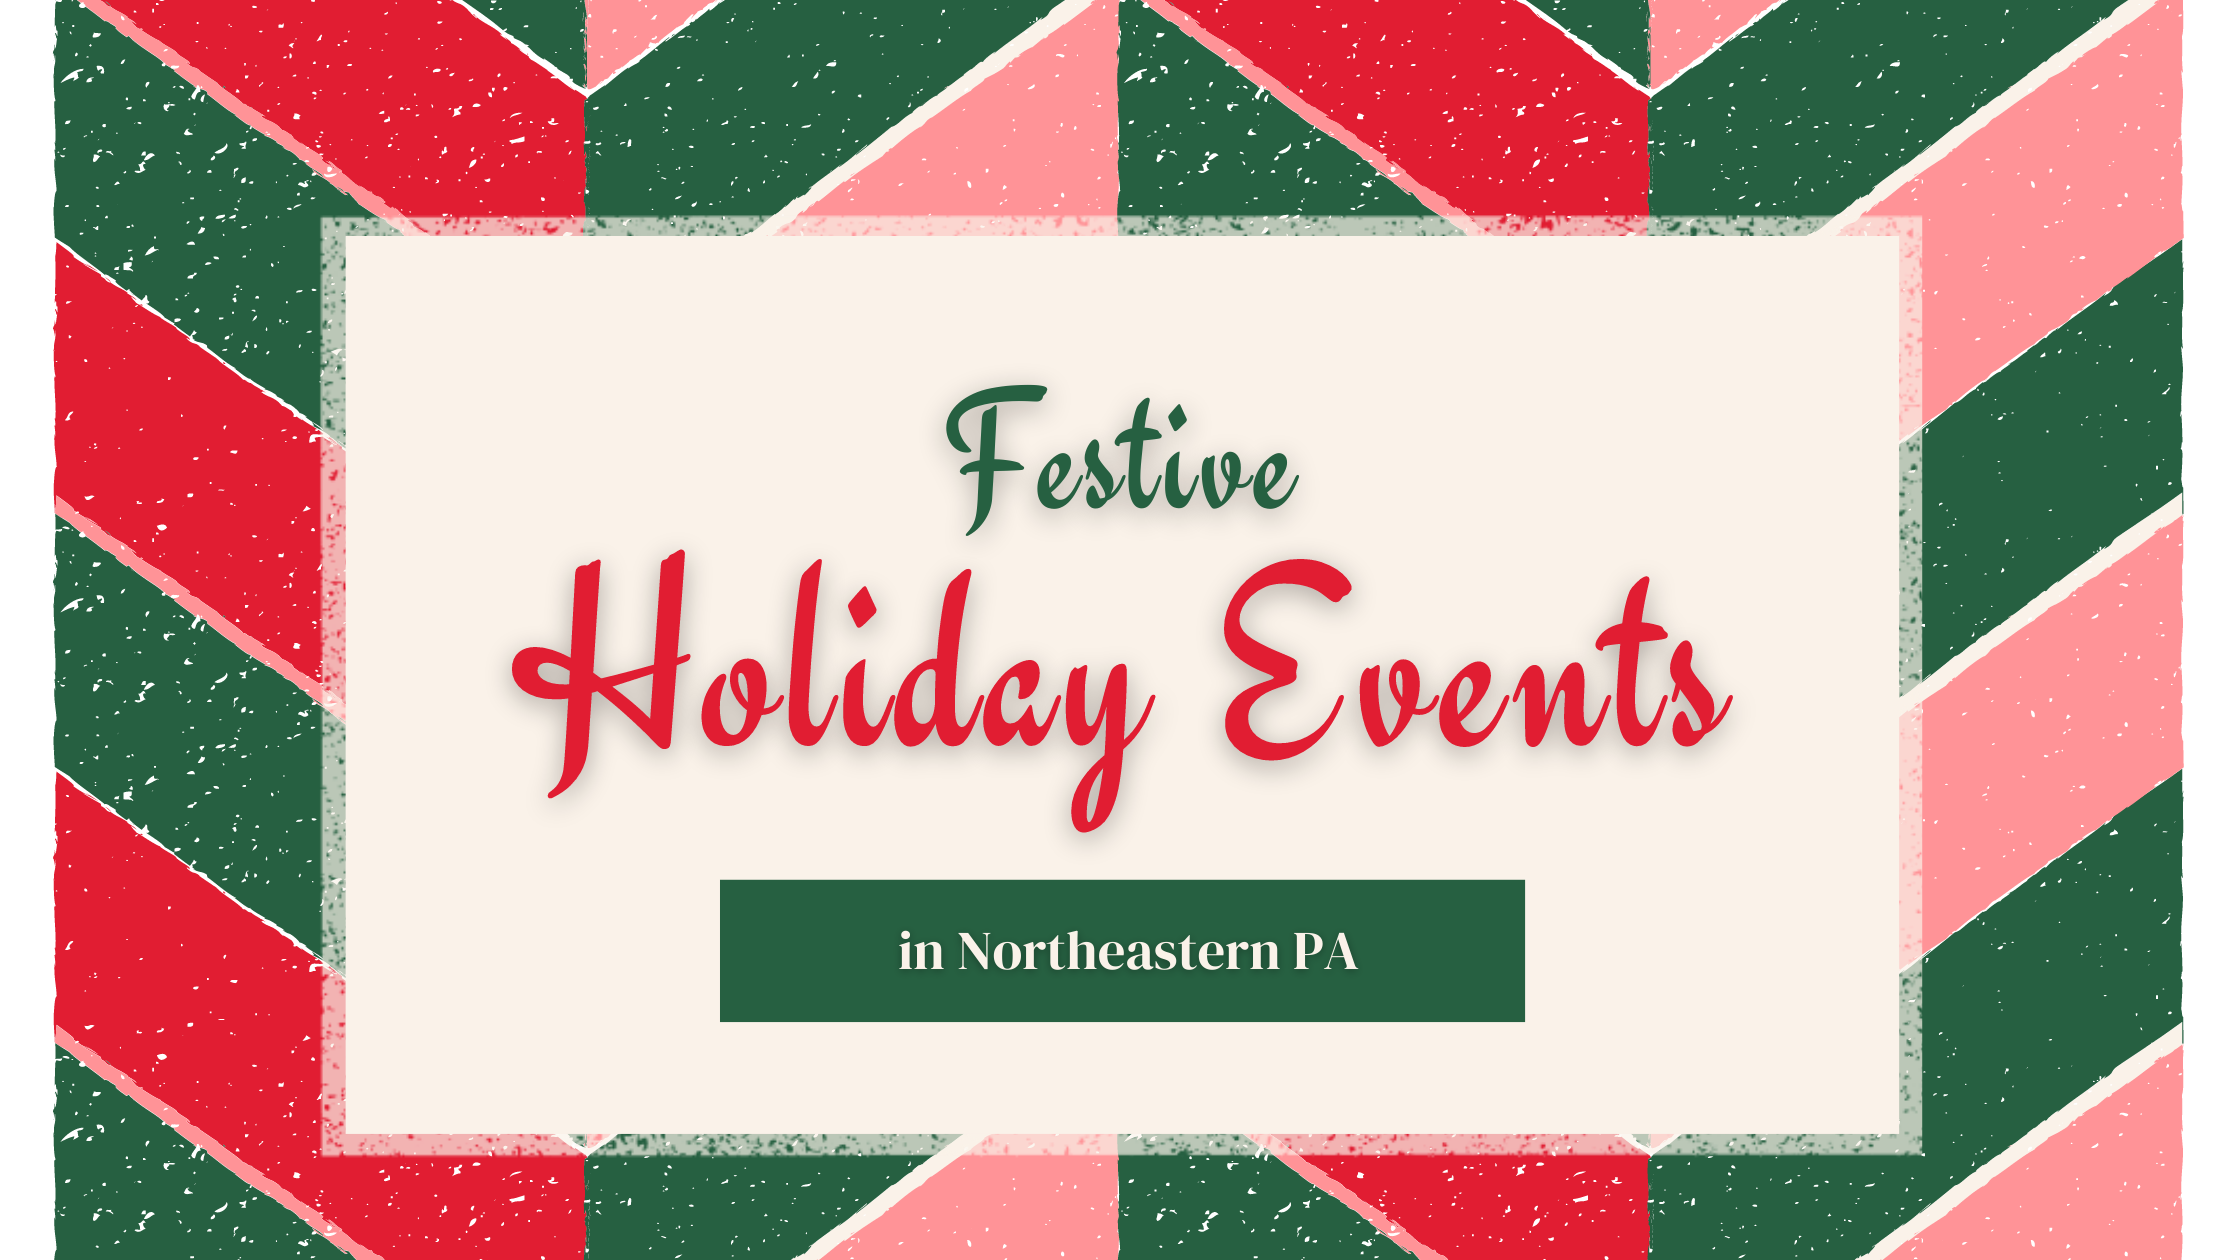 Festive Holiday Events in NEPA